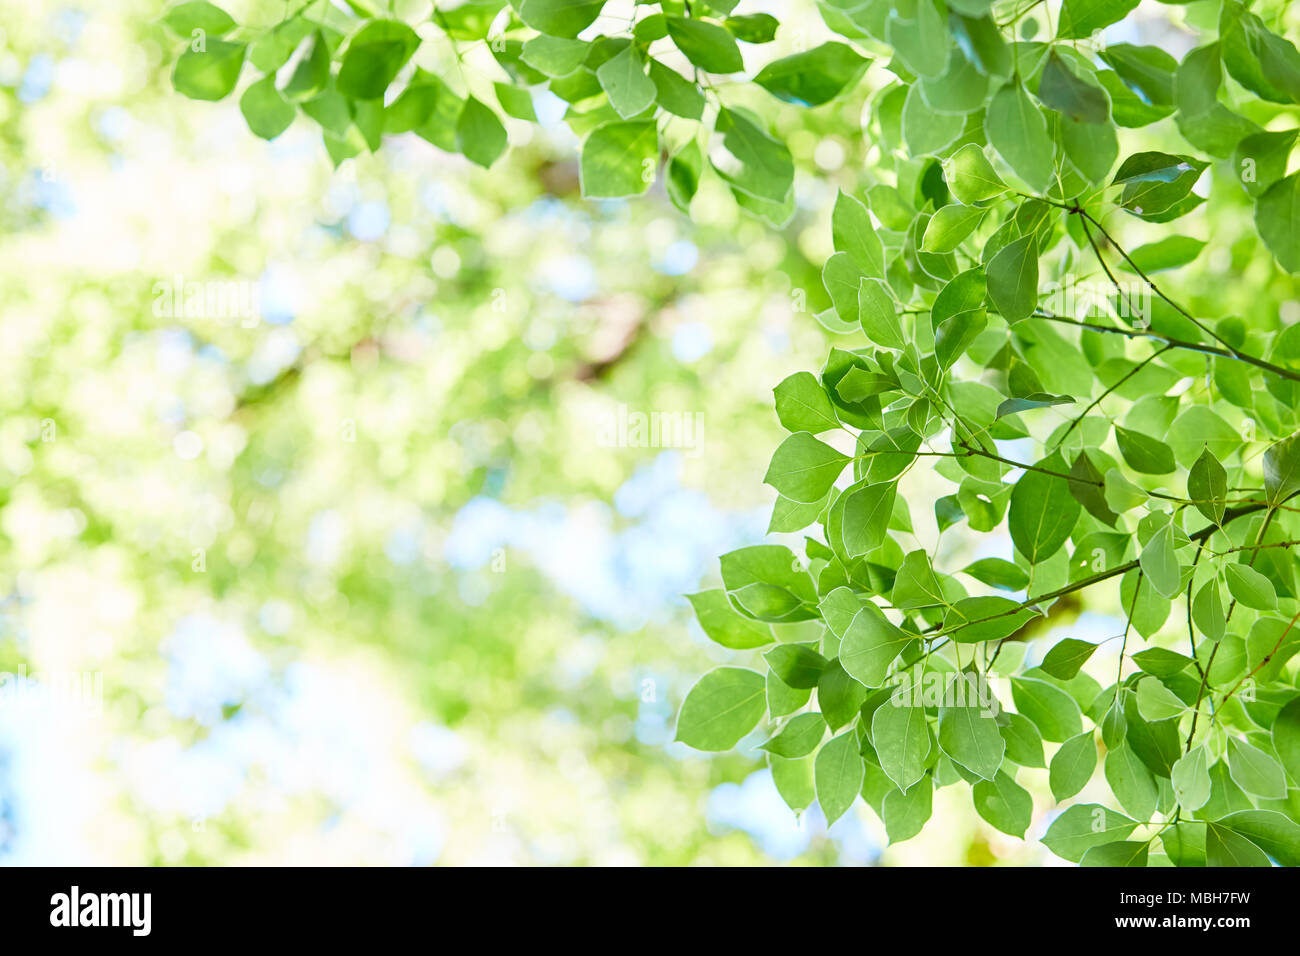 Fresh green in a city park Stock Photo